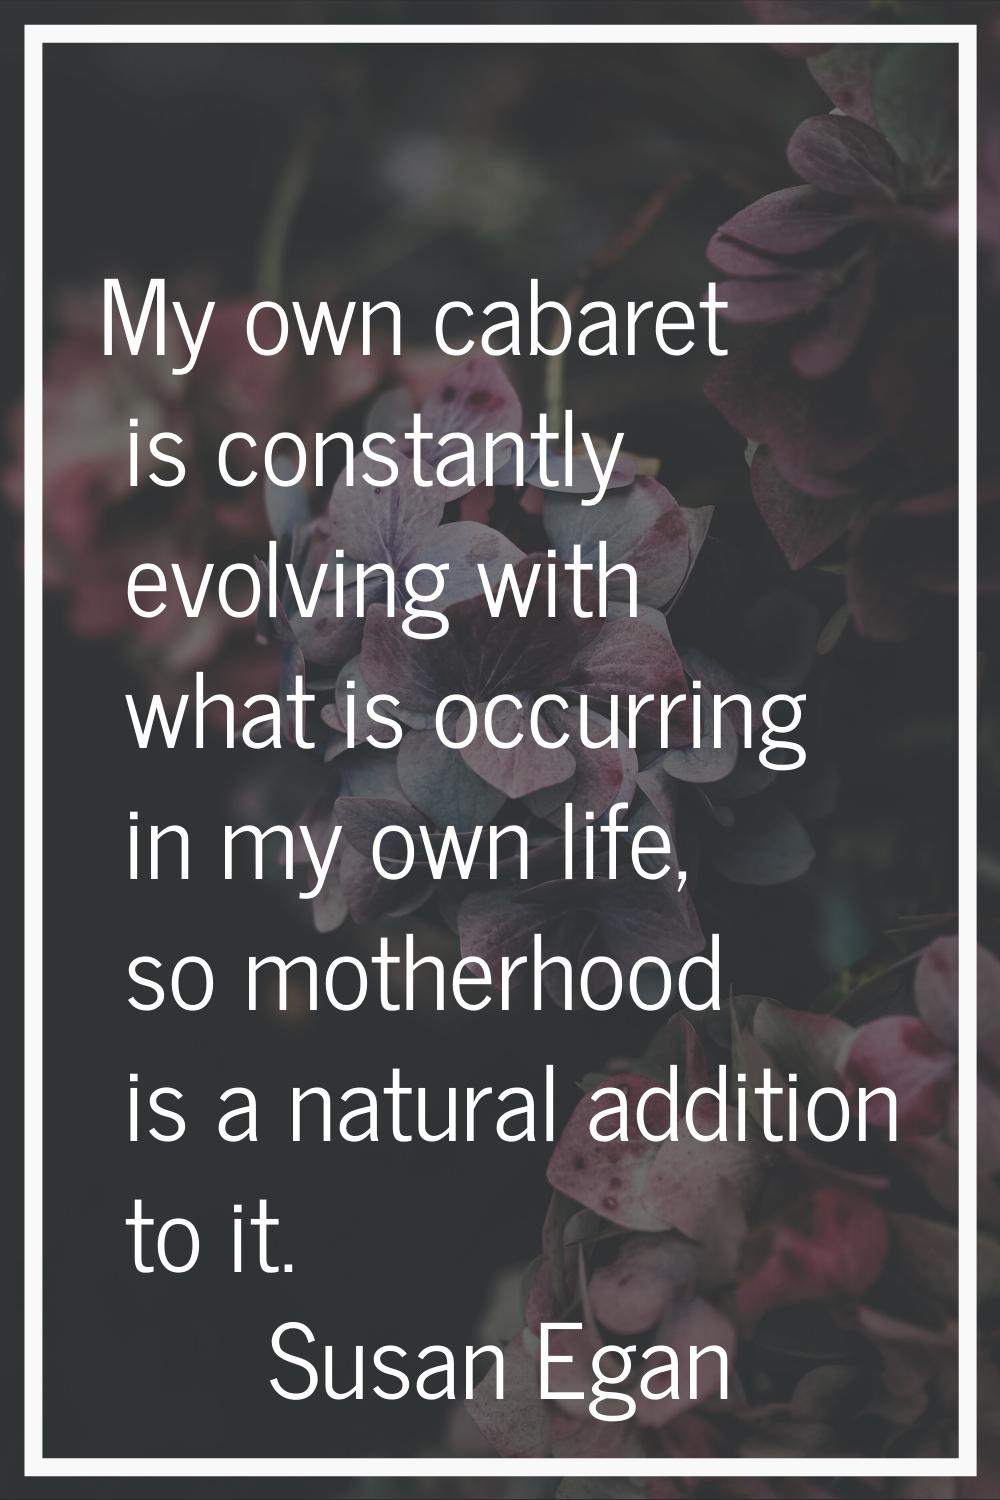 My own cabaret is constantly evolving with what is occurring in my own life, so motherhood is a nat